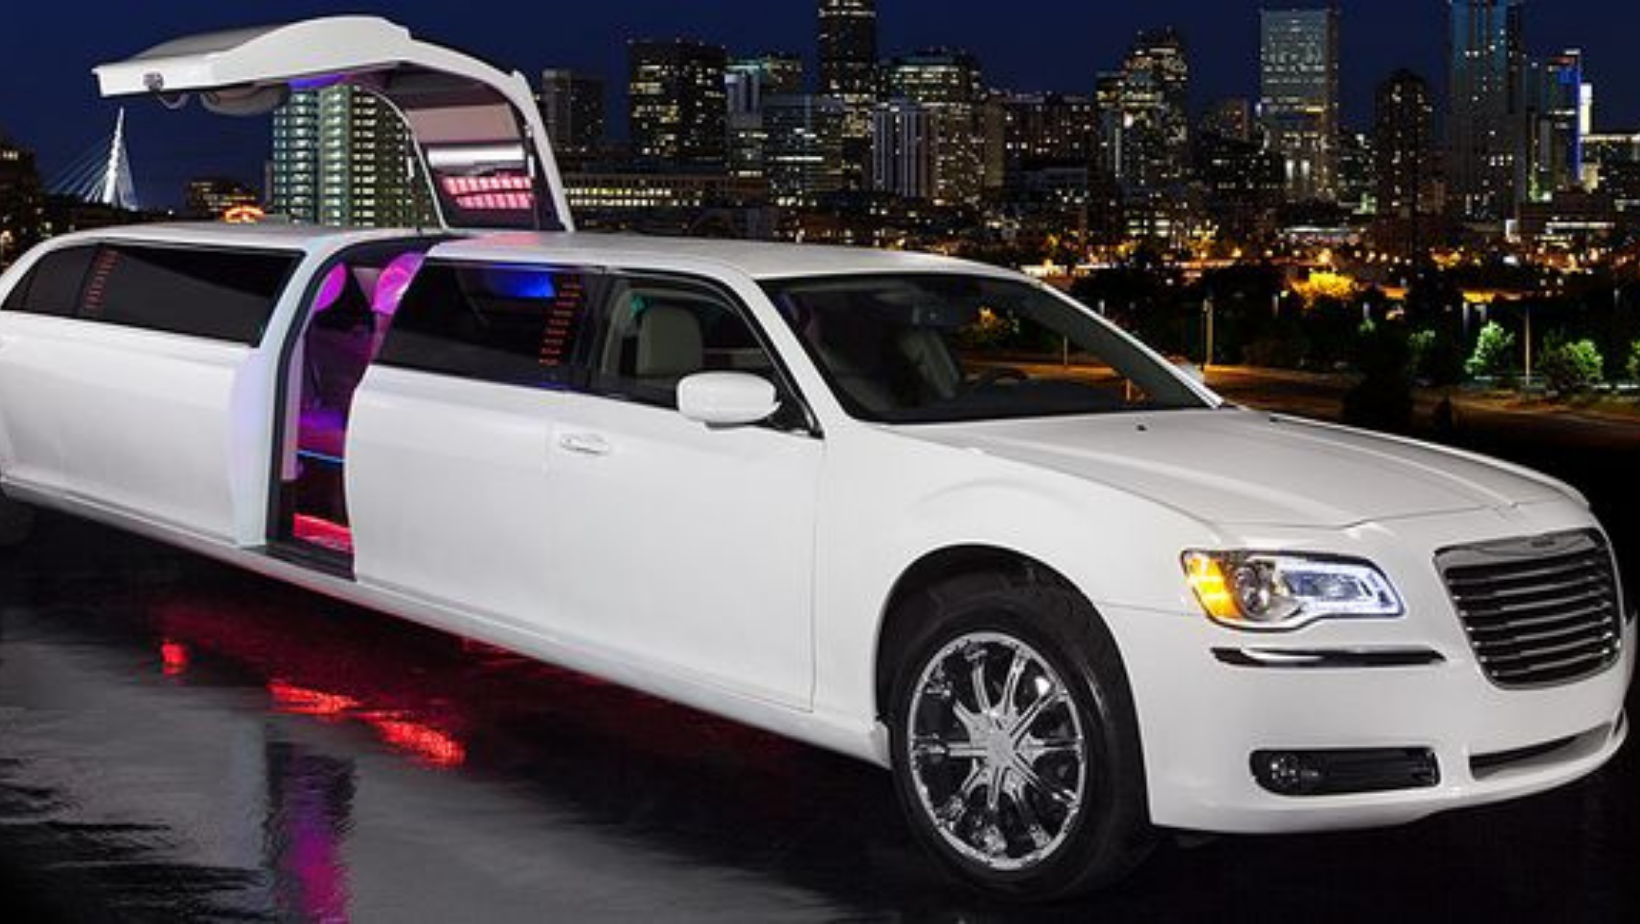 BOOK A LIMOUSINE SERVICE TO TAKE SPECIAL OCCASIONS TO THE NEXT LEVEL.